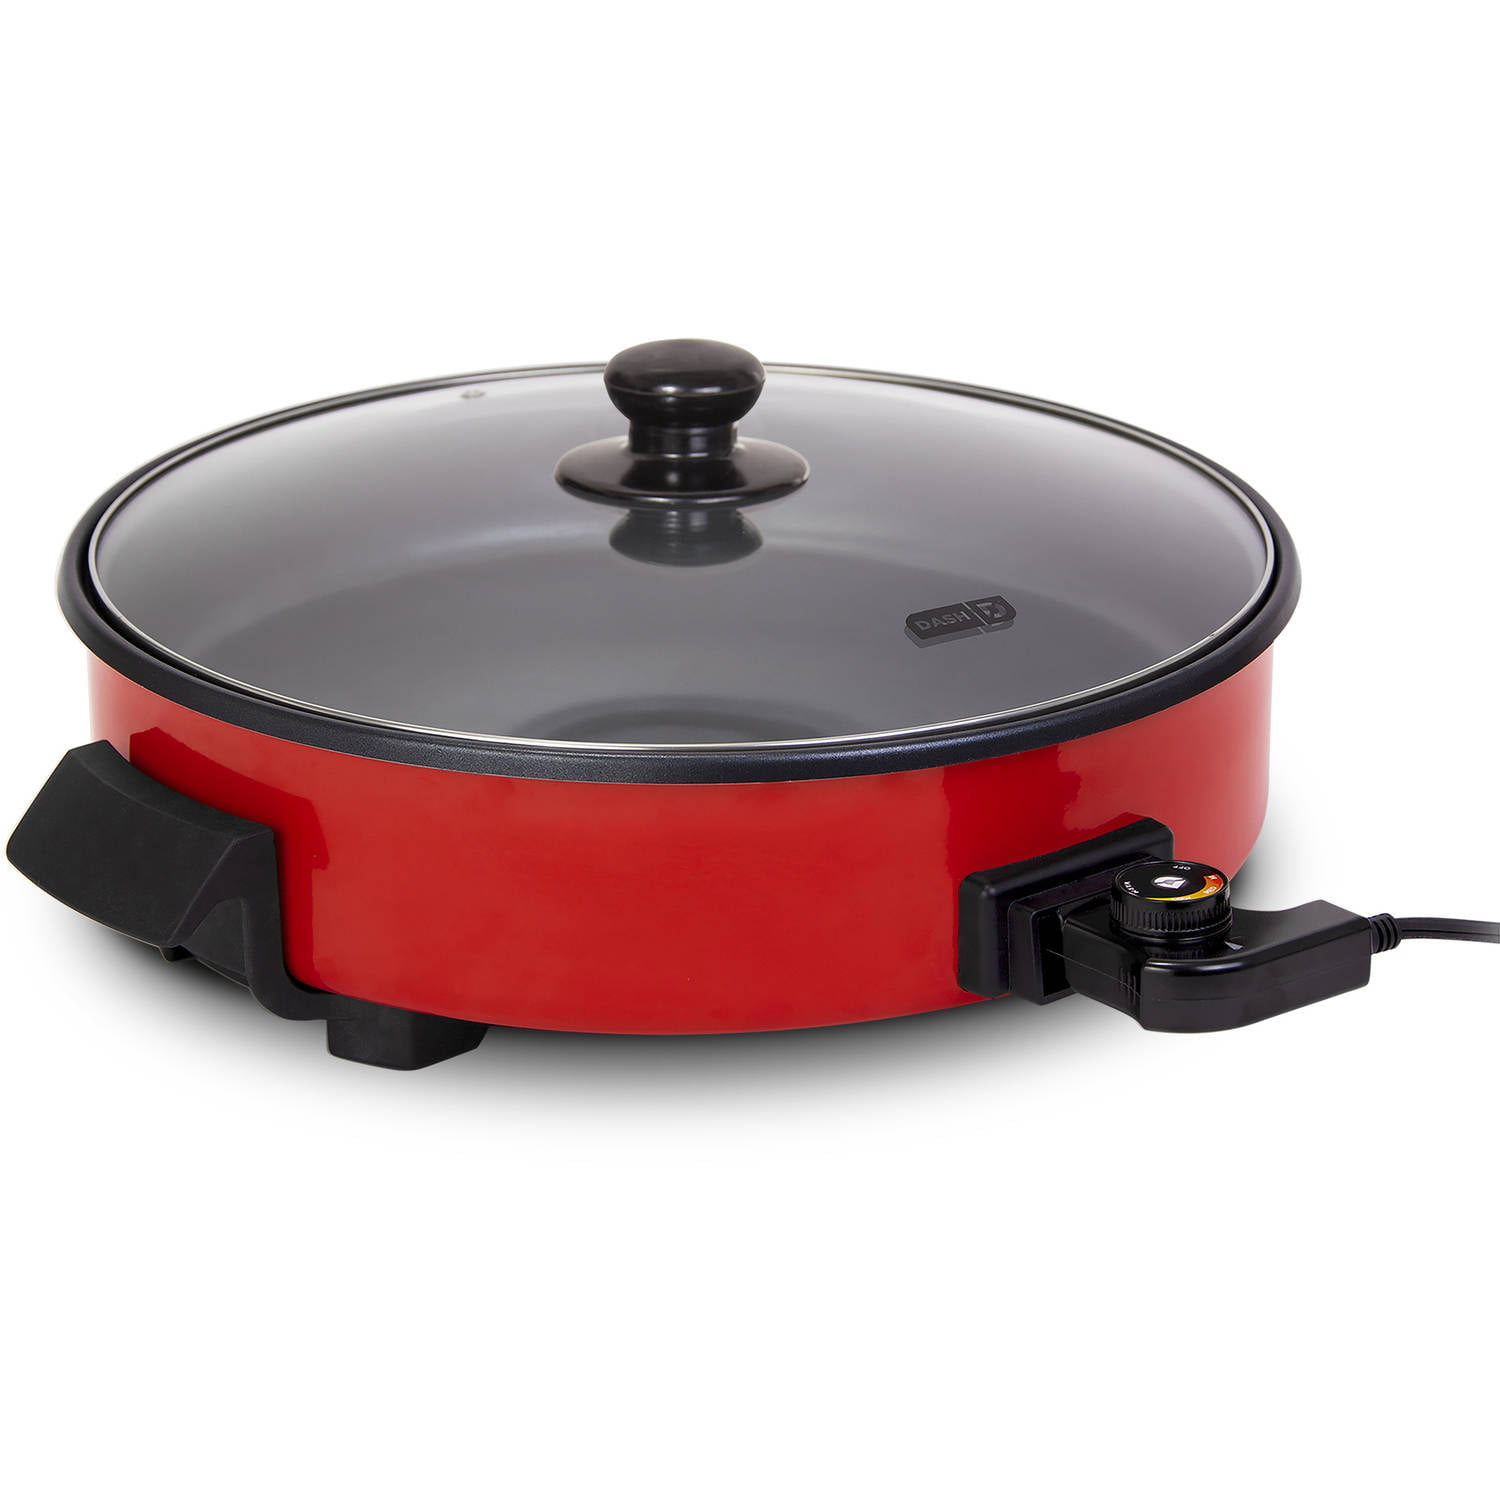 Dash DRG 14 X-Large Electric Skillet with Free Recipe Book